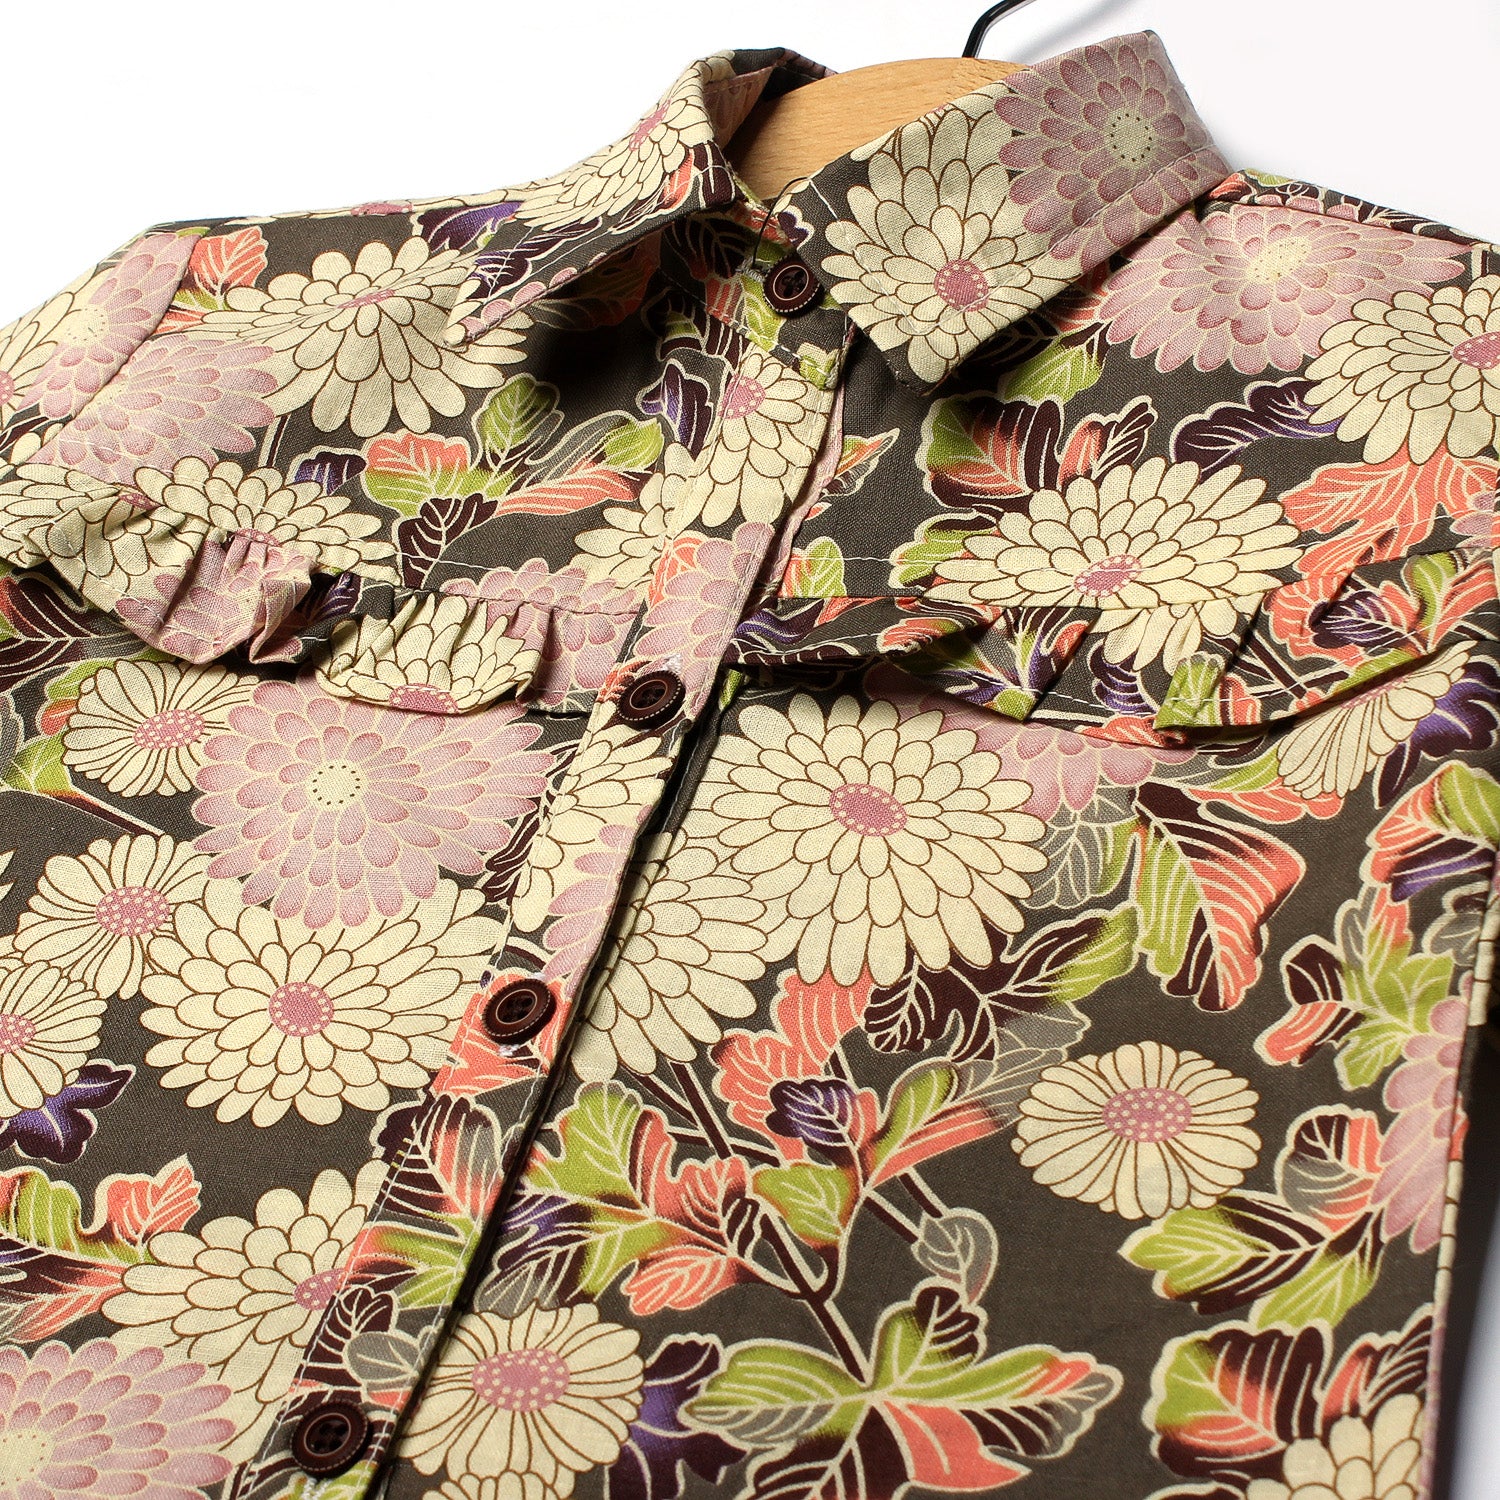 OFF WHITE BIG FLOWER PRINTED CASUAL SHIRT FOR GIRLS